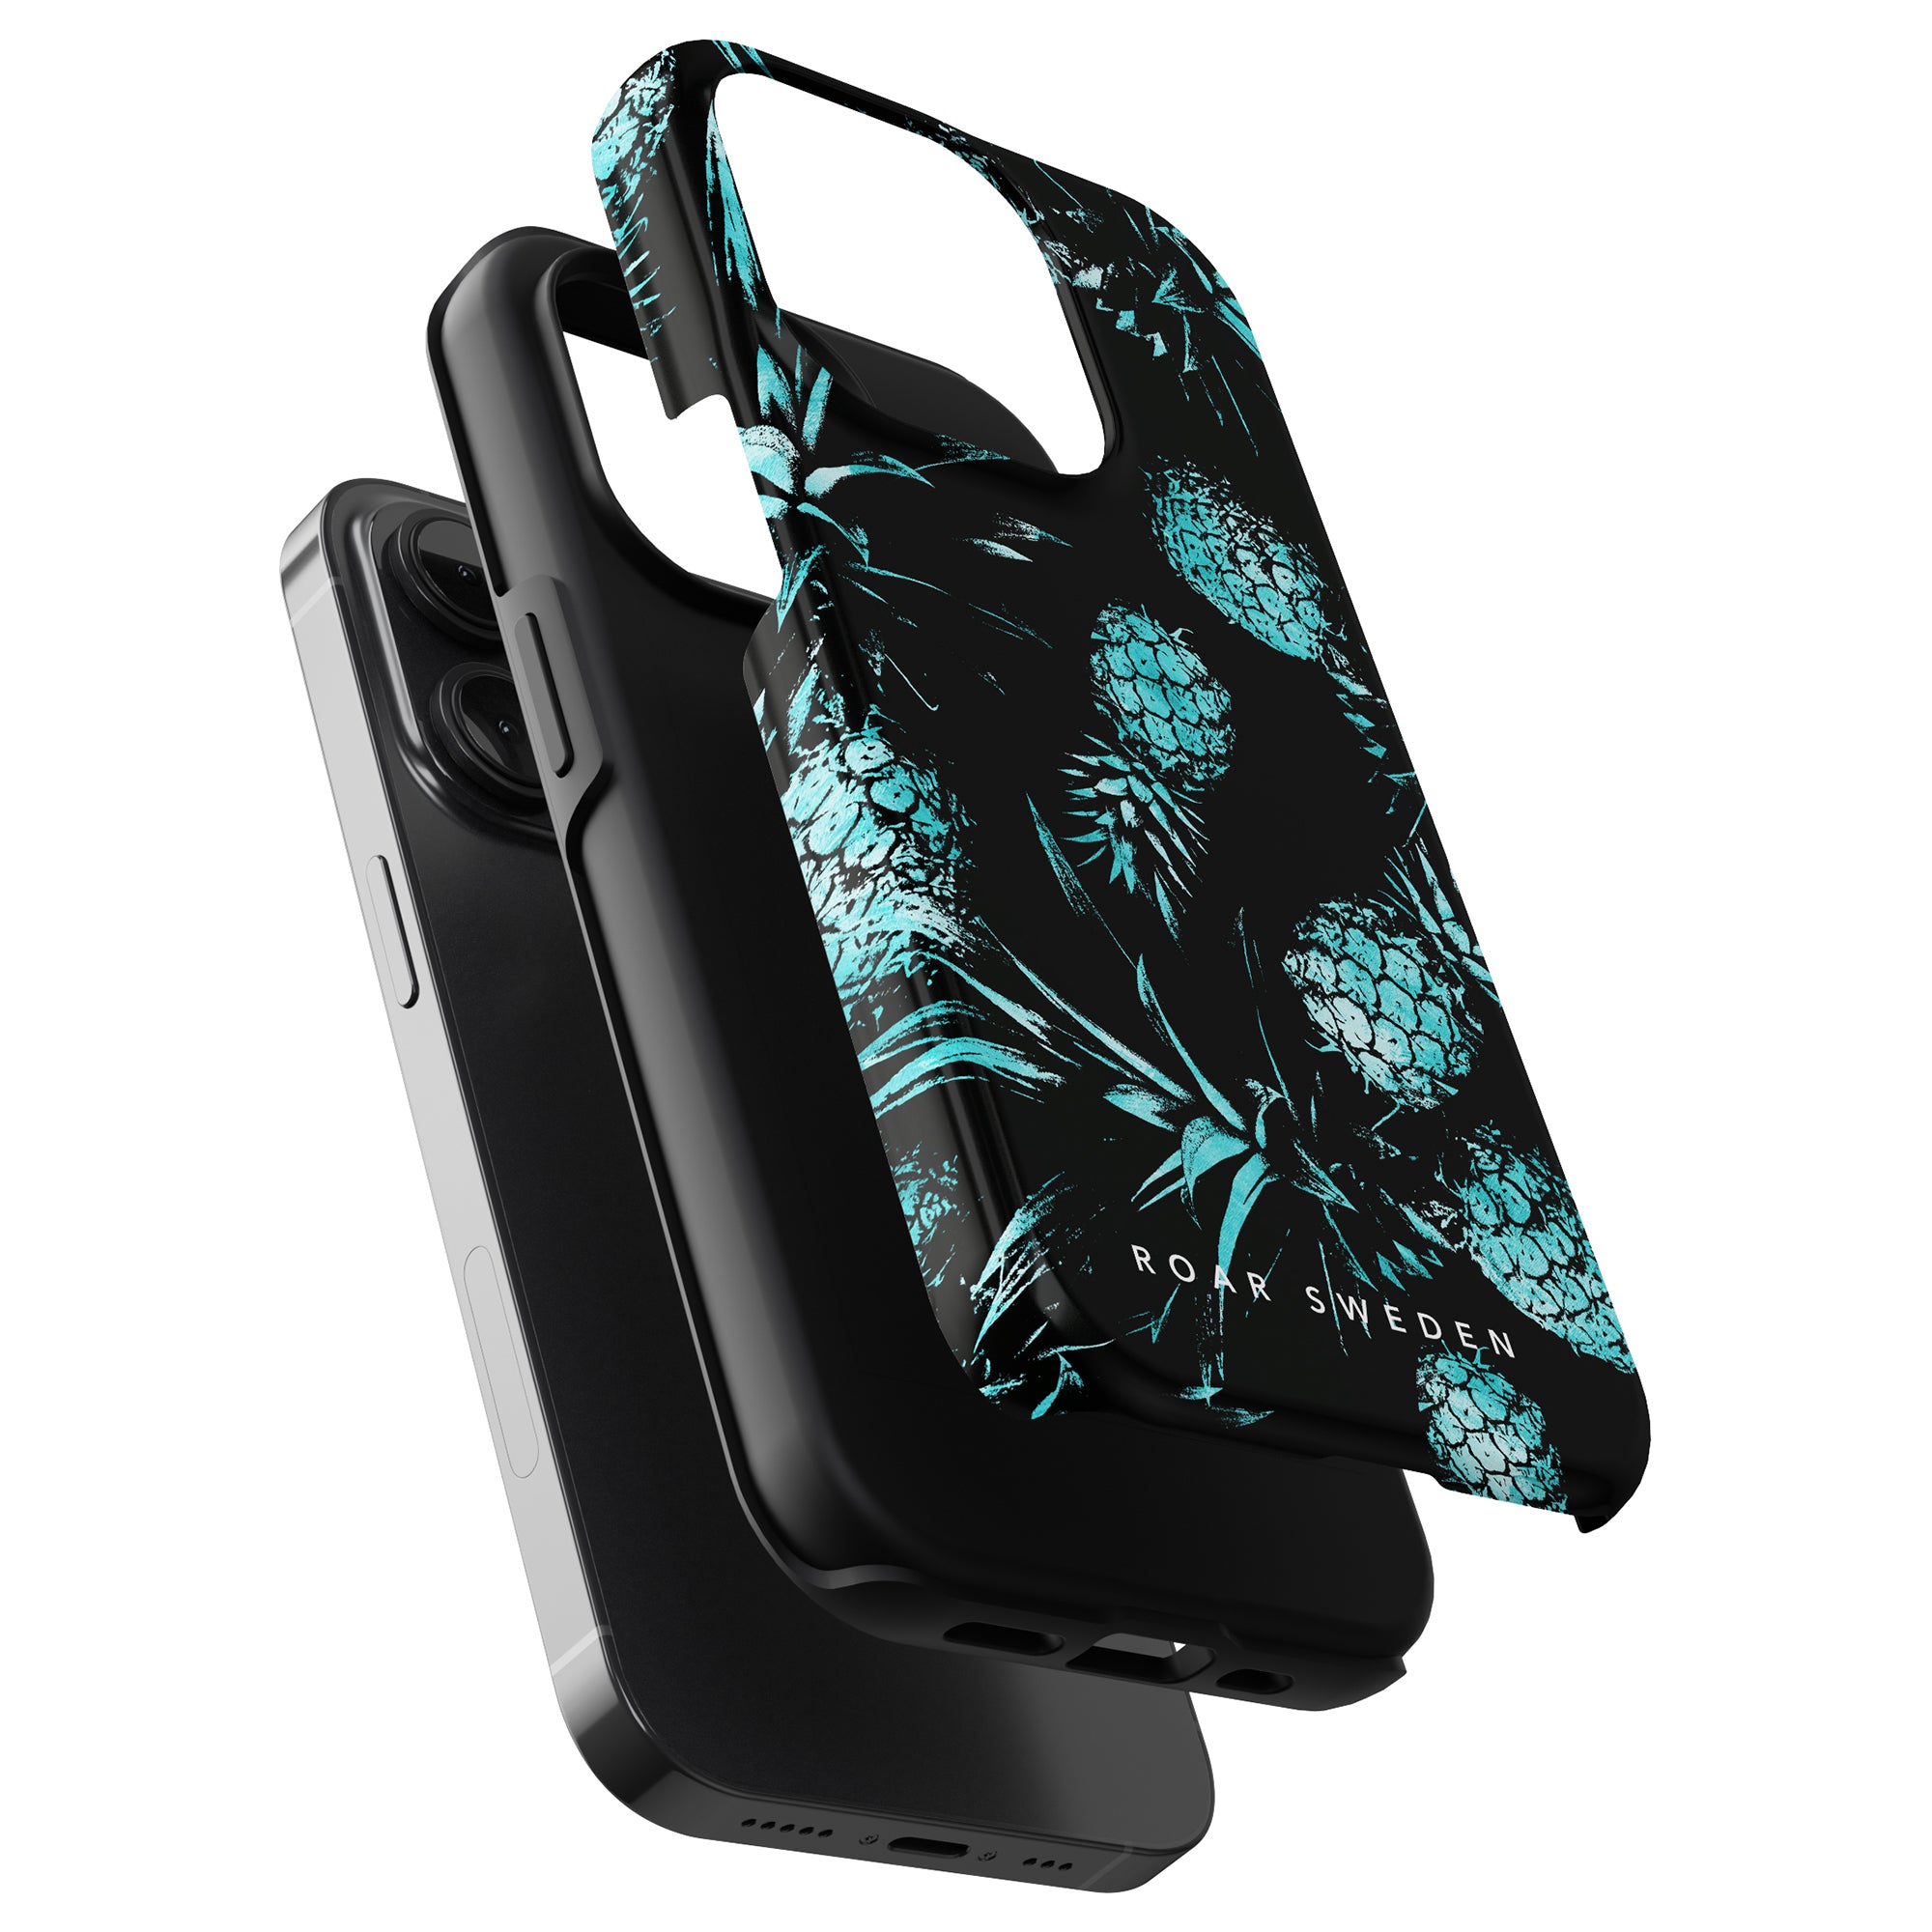 Three protective phone cases stacked slightly off-center against a white background: one black, one clear, and one Turquoise Pineapples - Tough Case.